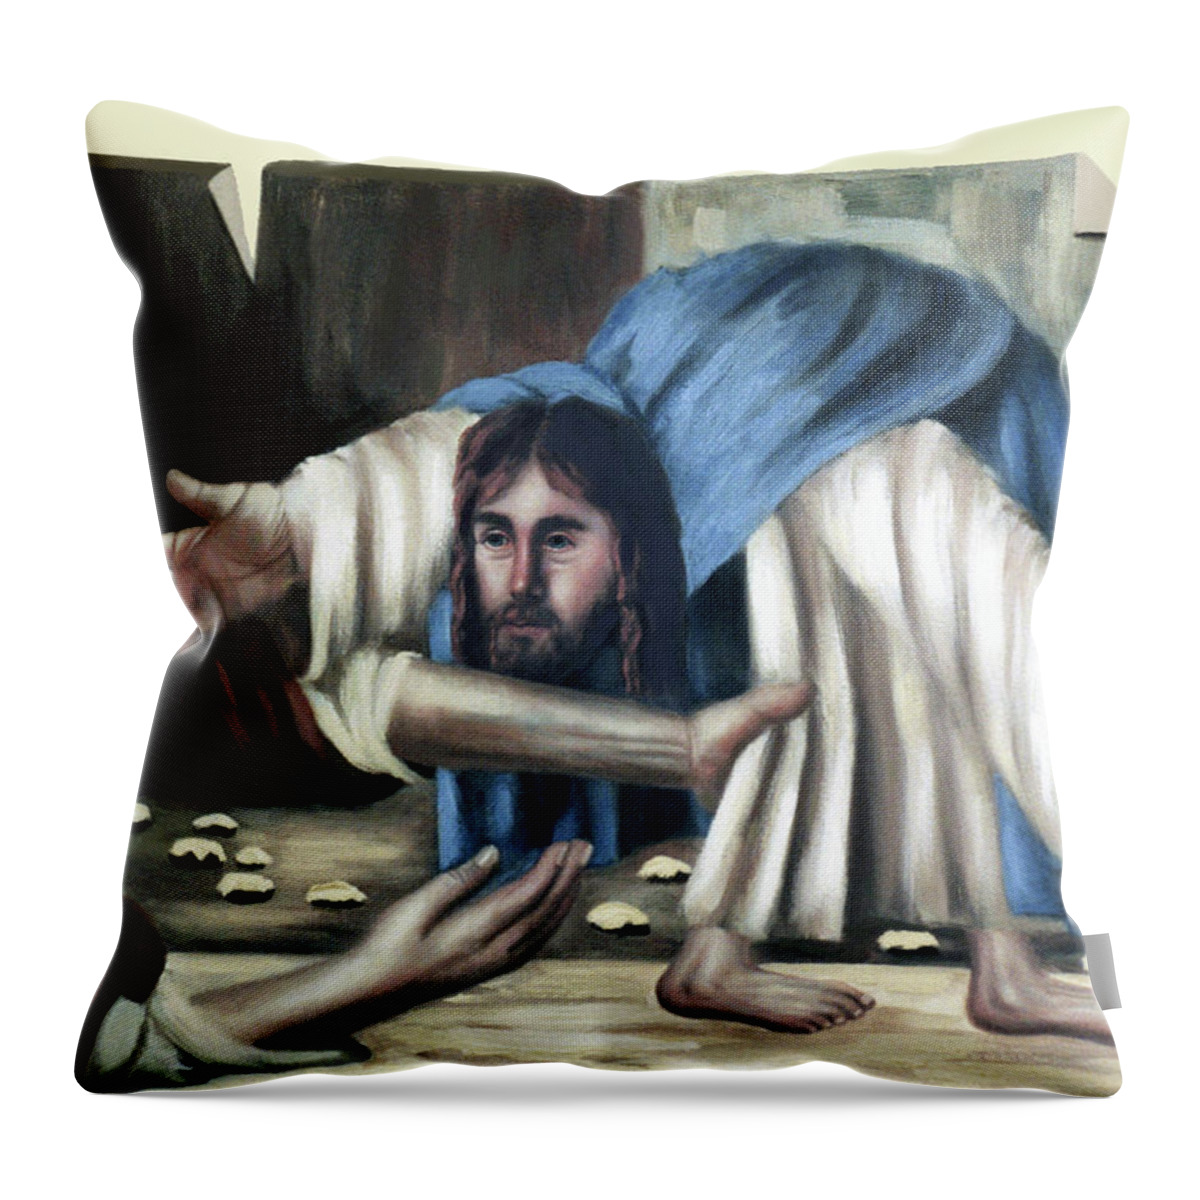 Cubism Throw Pillow featuring the painting Jesus And The Old Lady by Anthony Falbo